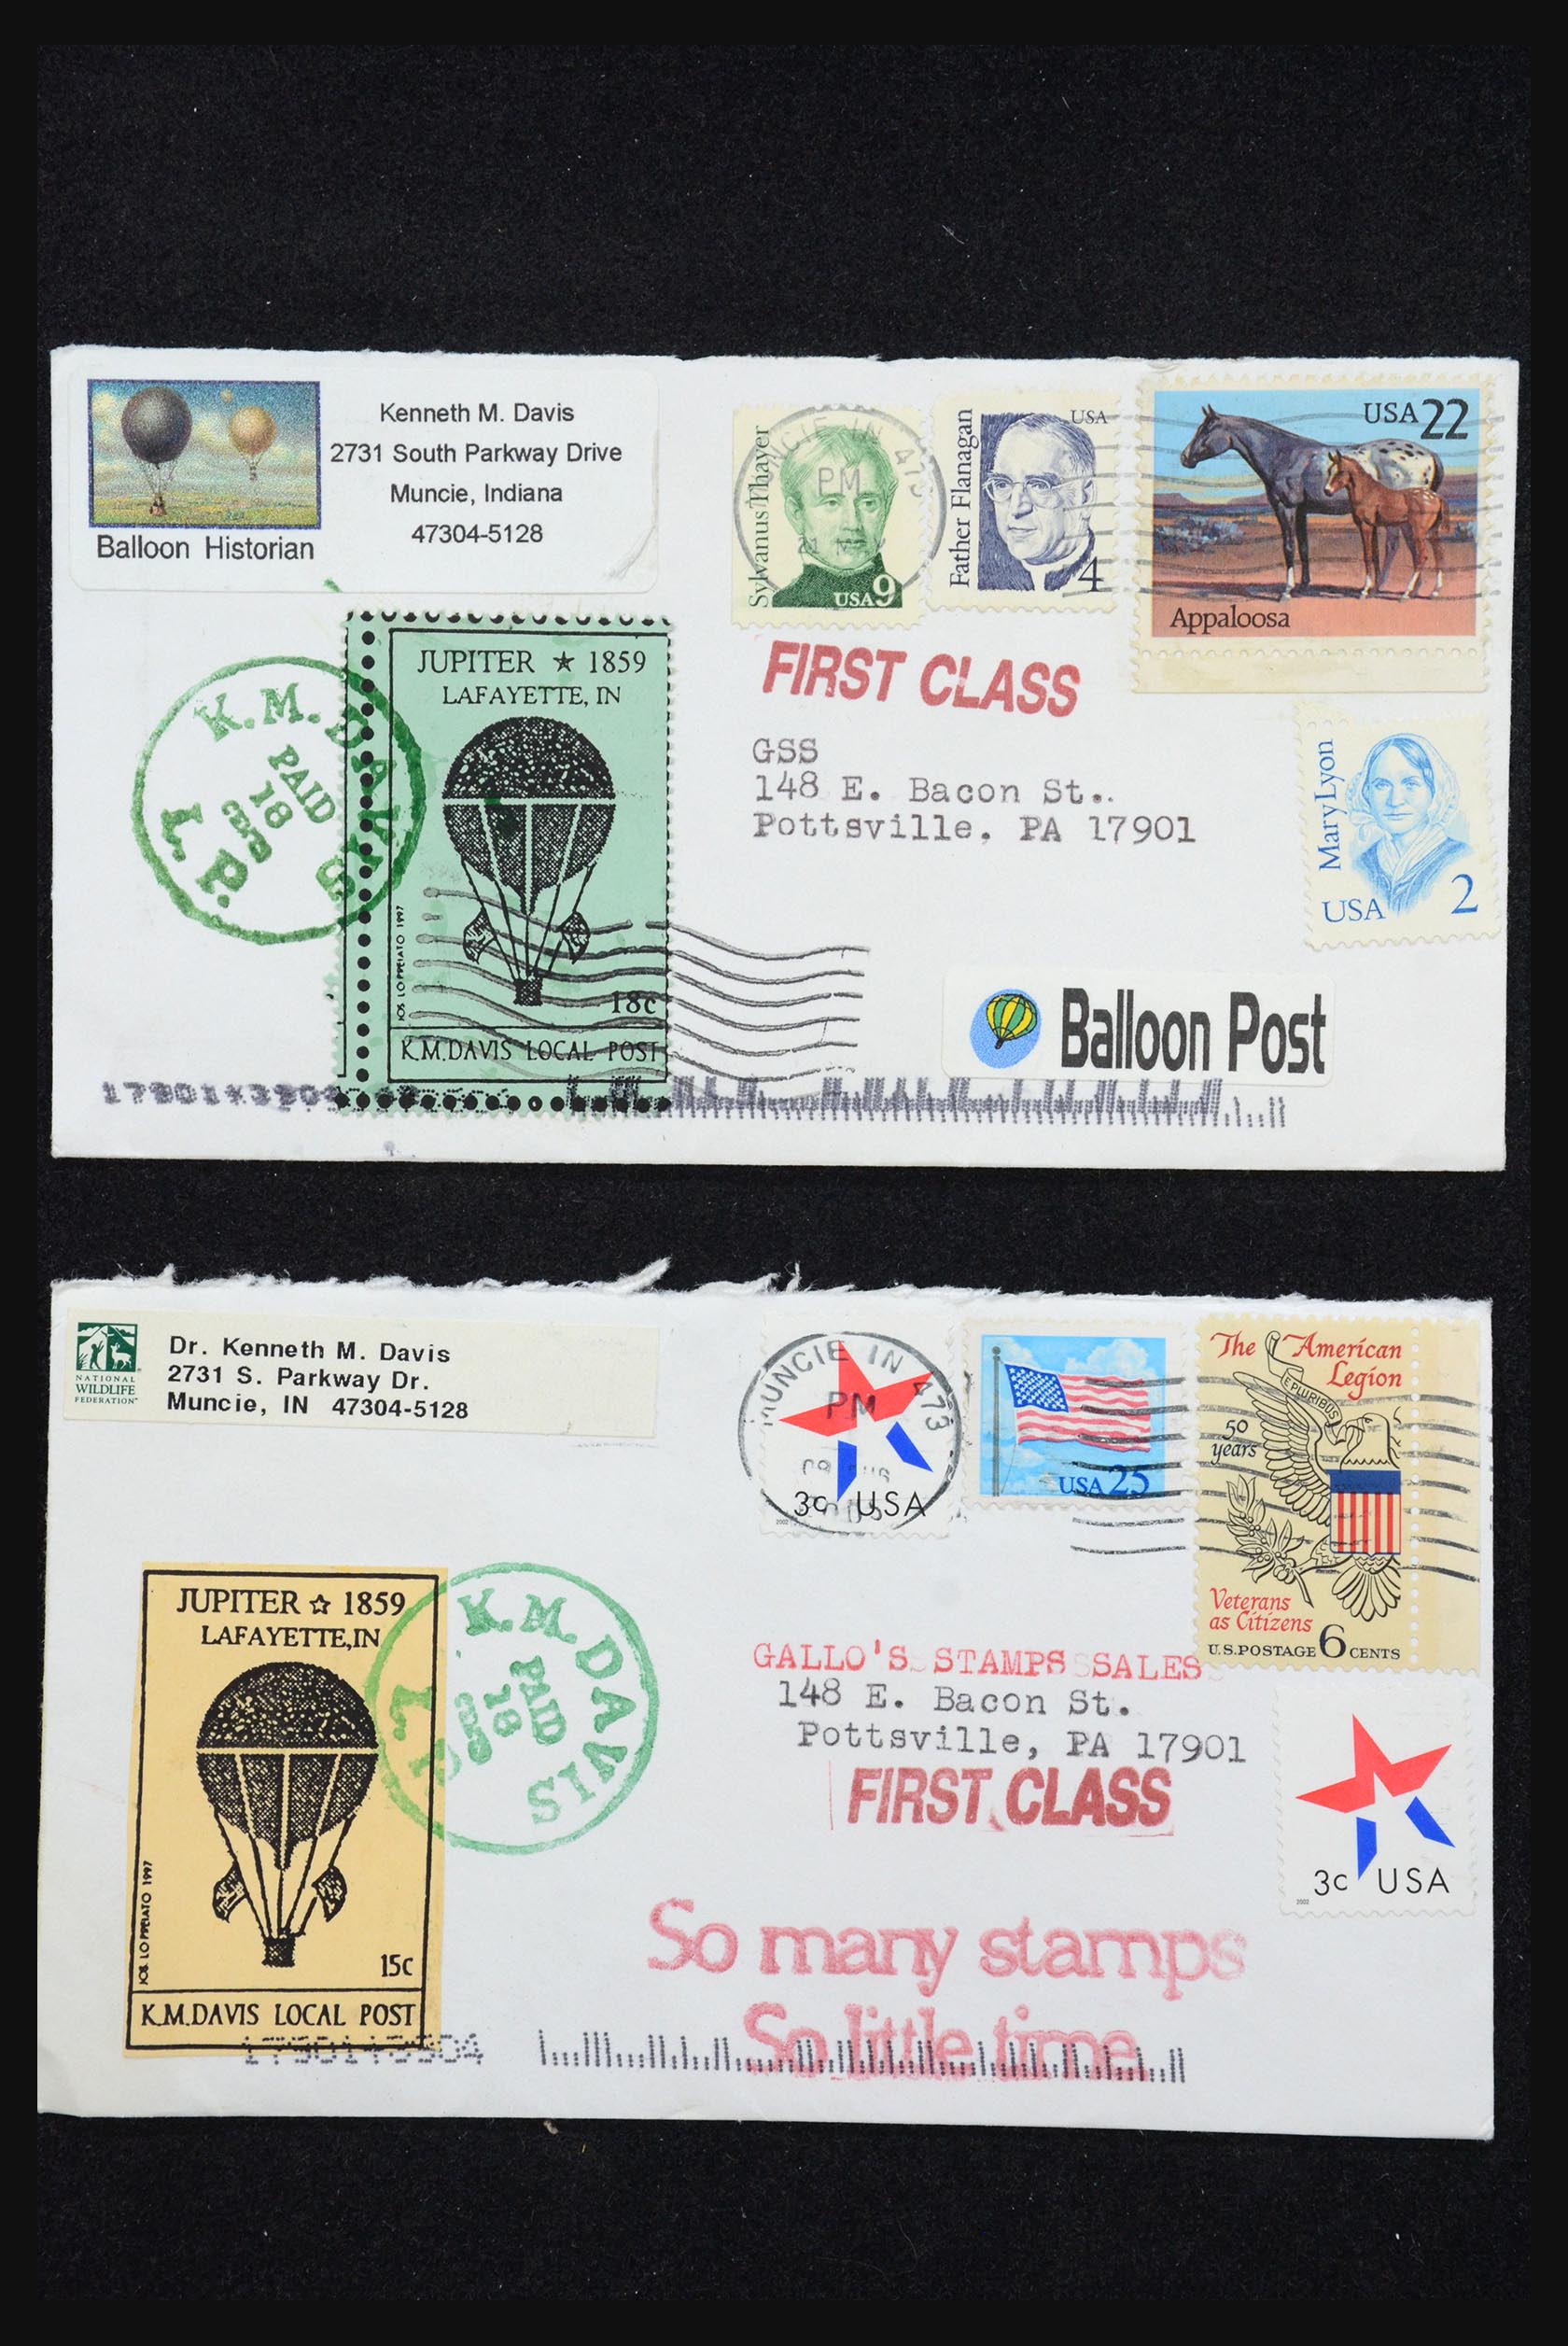 31530 062 - 31530 USA special covers.